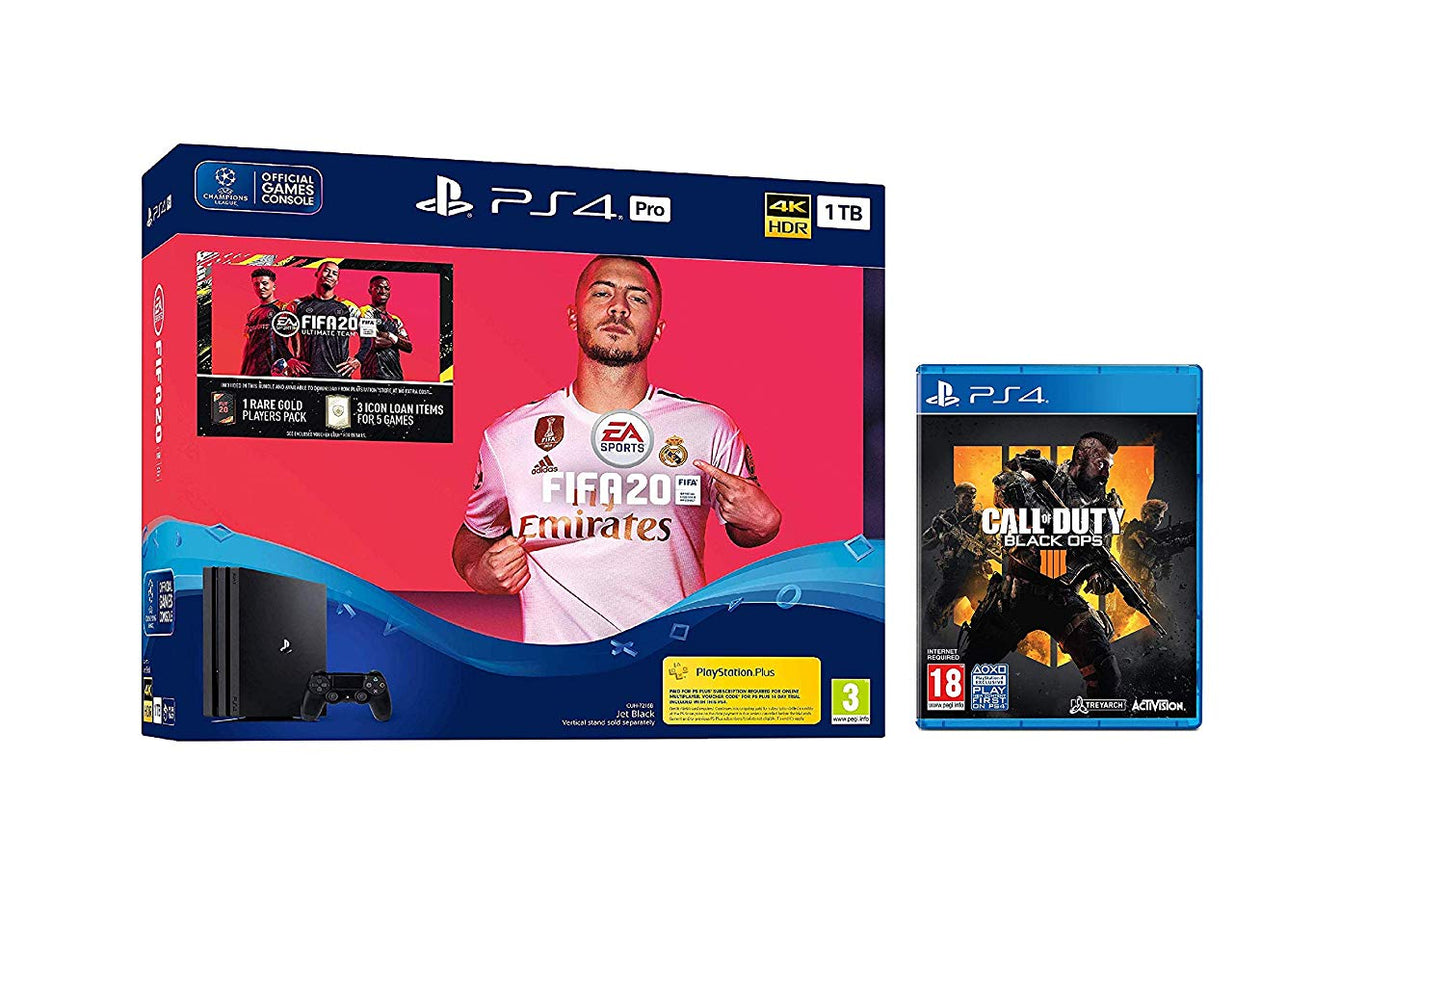 Fifa 20 PS4 Pro 1TB Bundle (PS4) - Offer Games